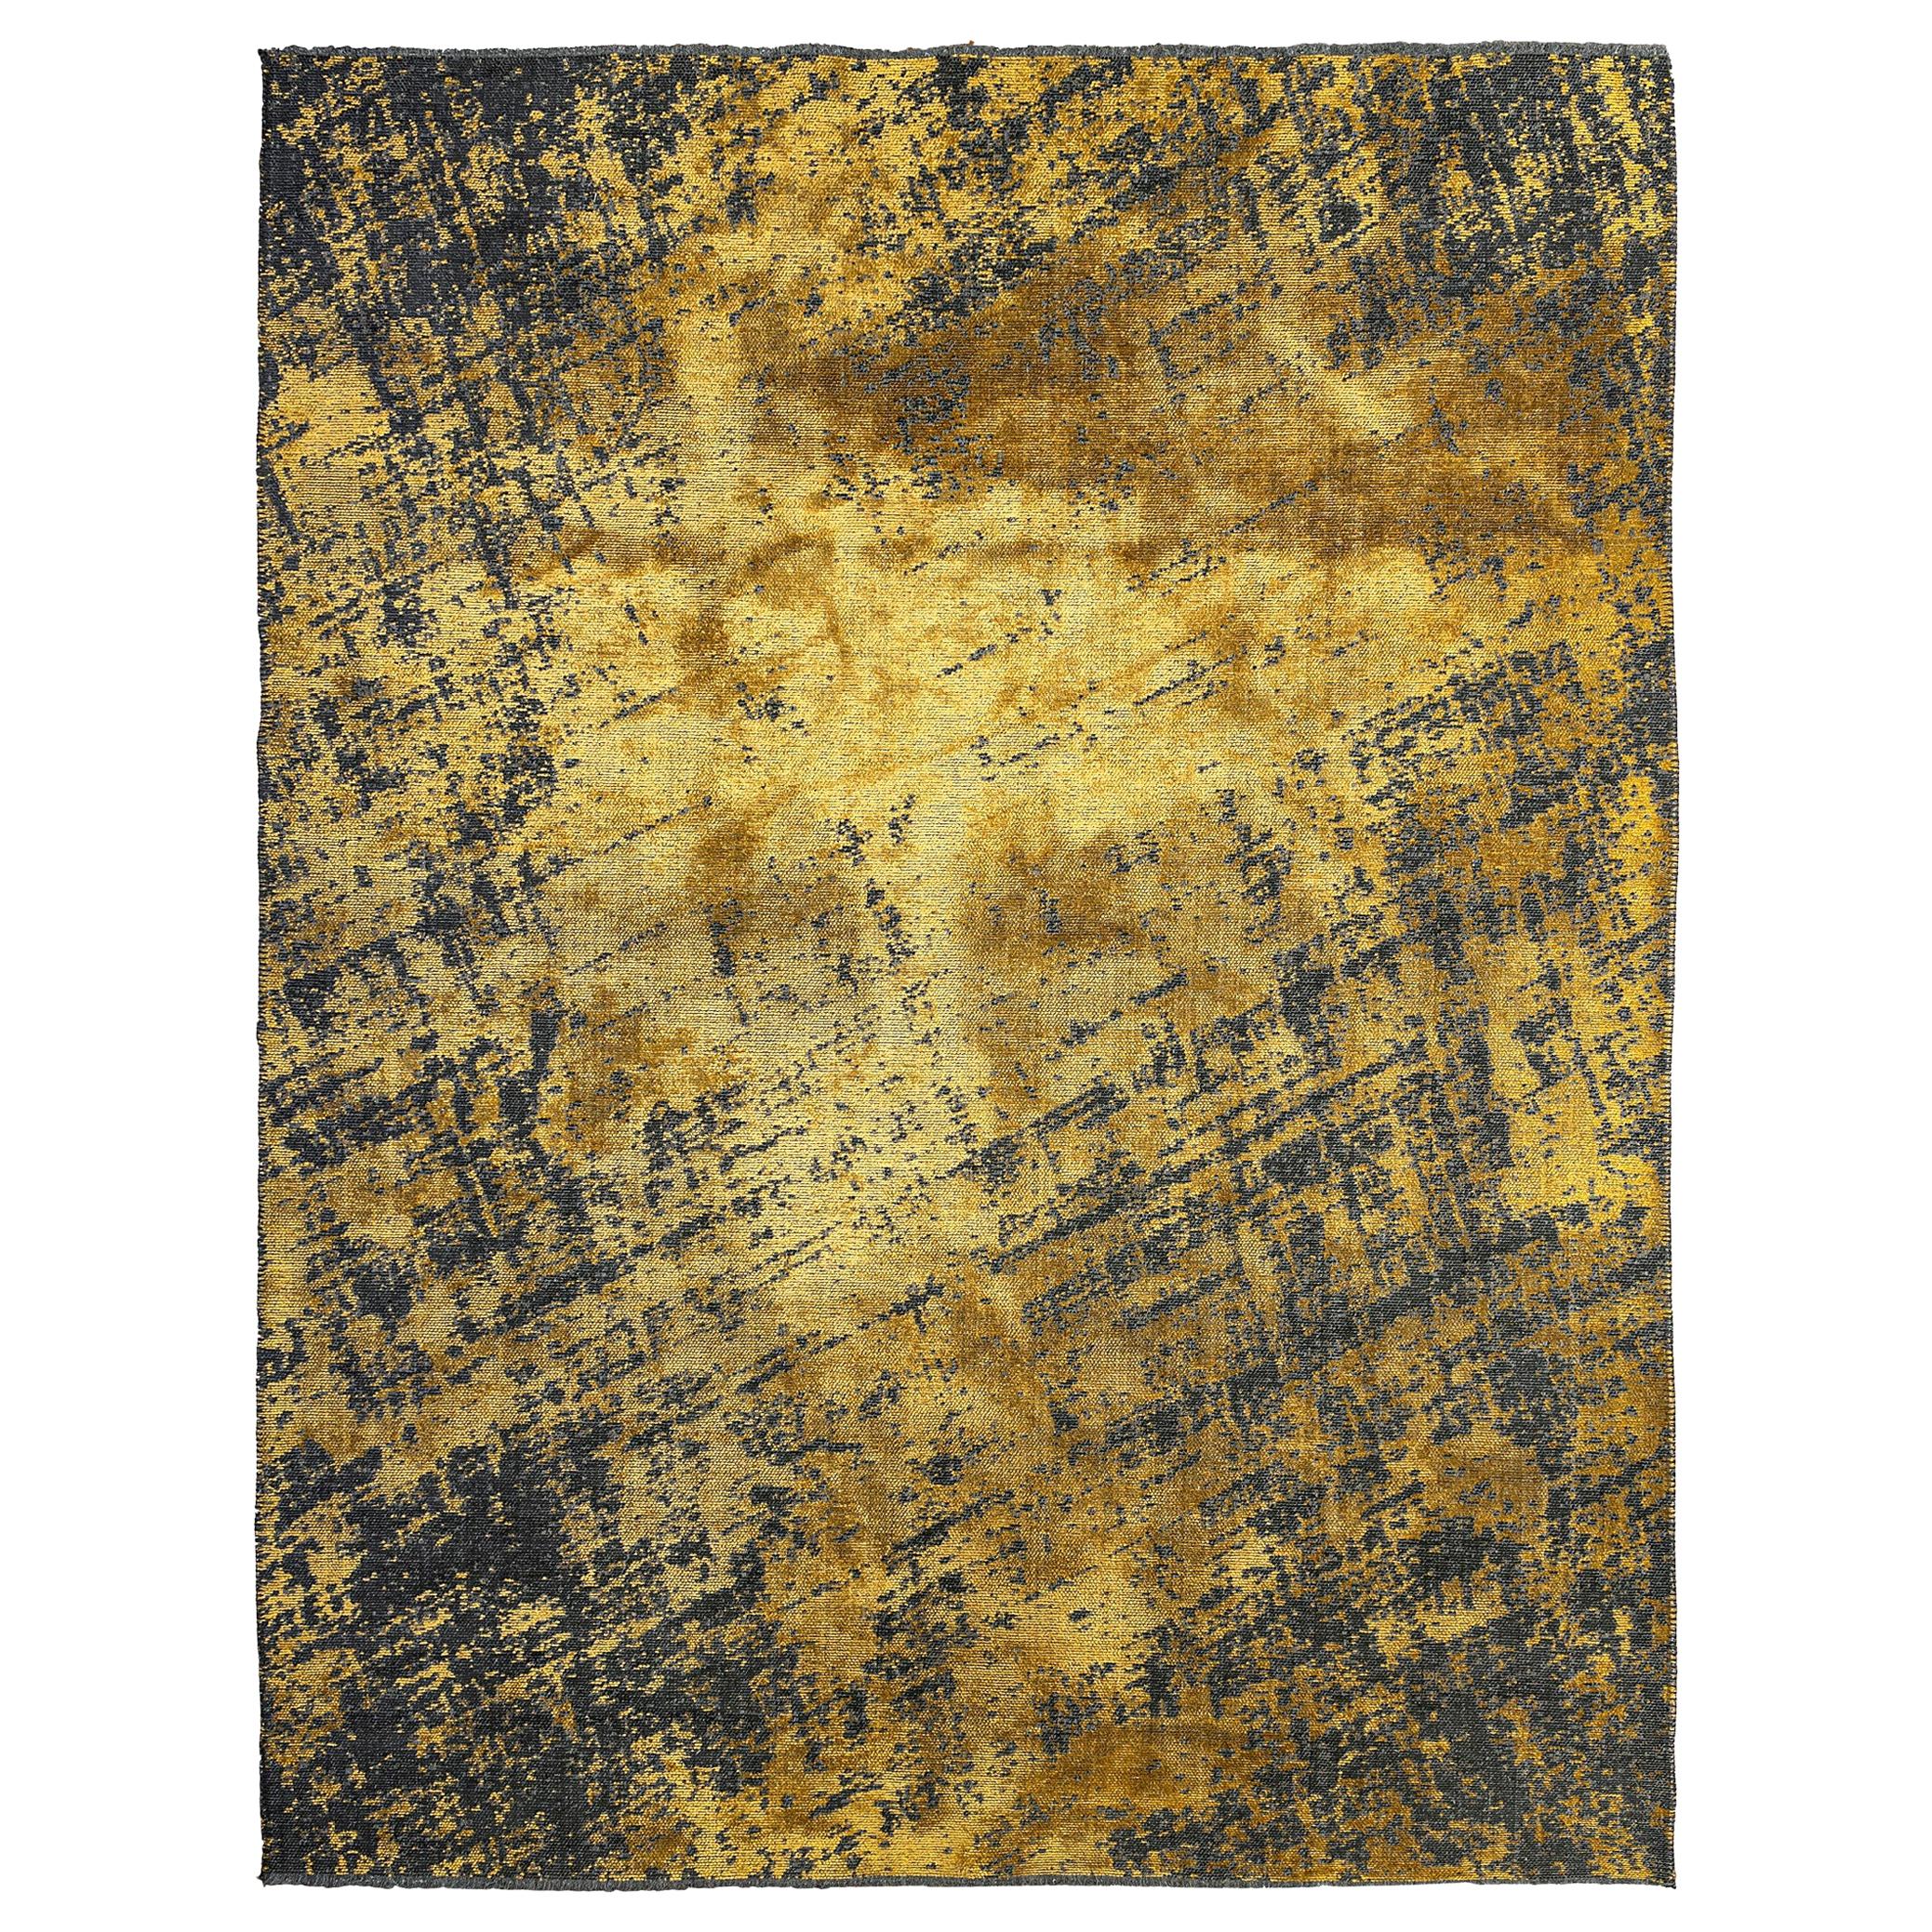 Yellow Gold and Charcoal Gray Modern Abstract Fade Pattern Soft Rug